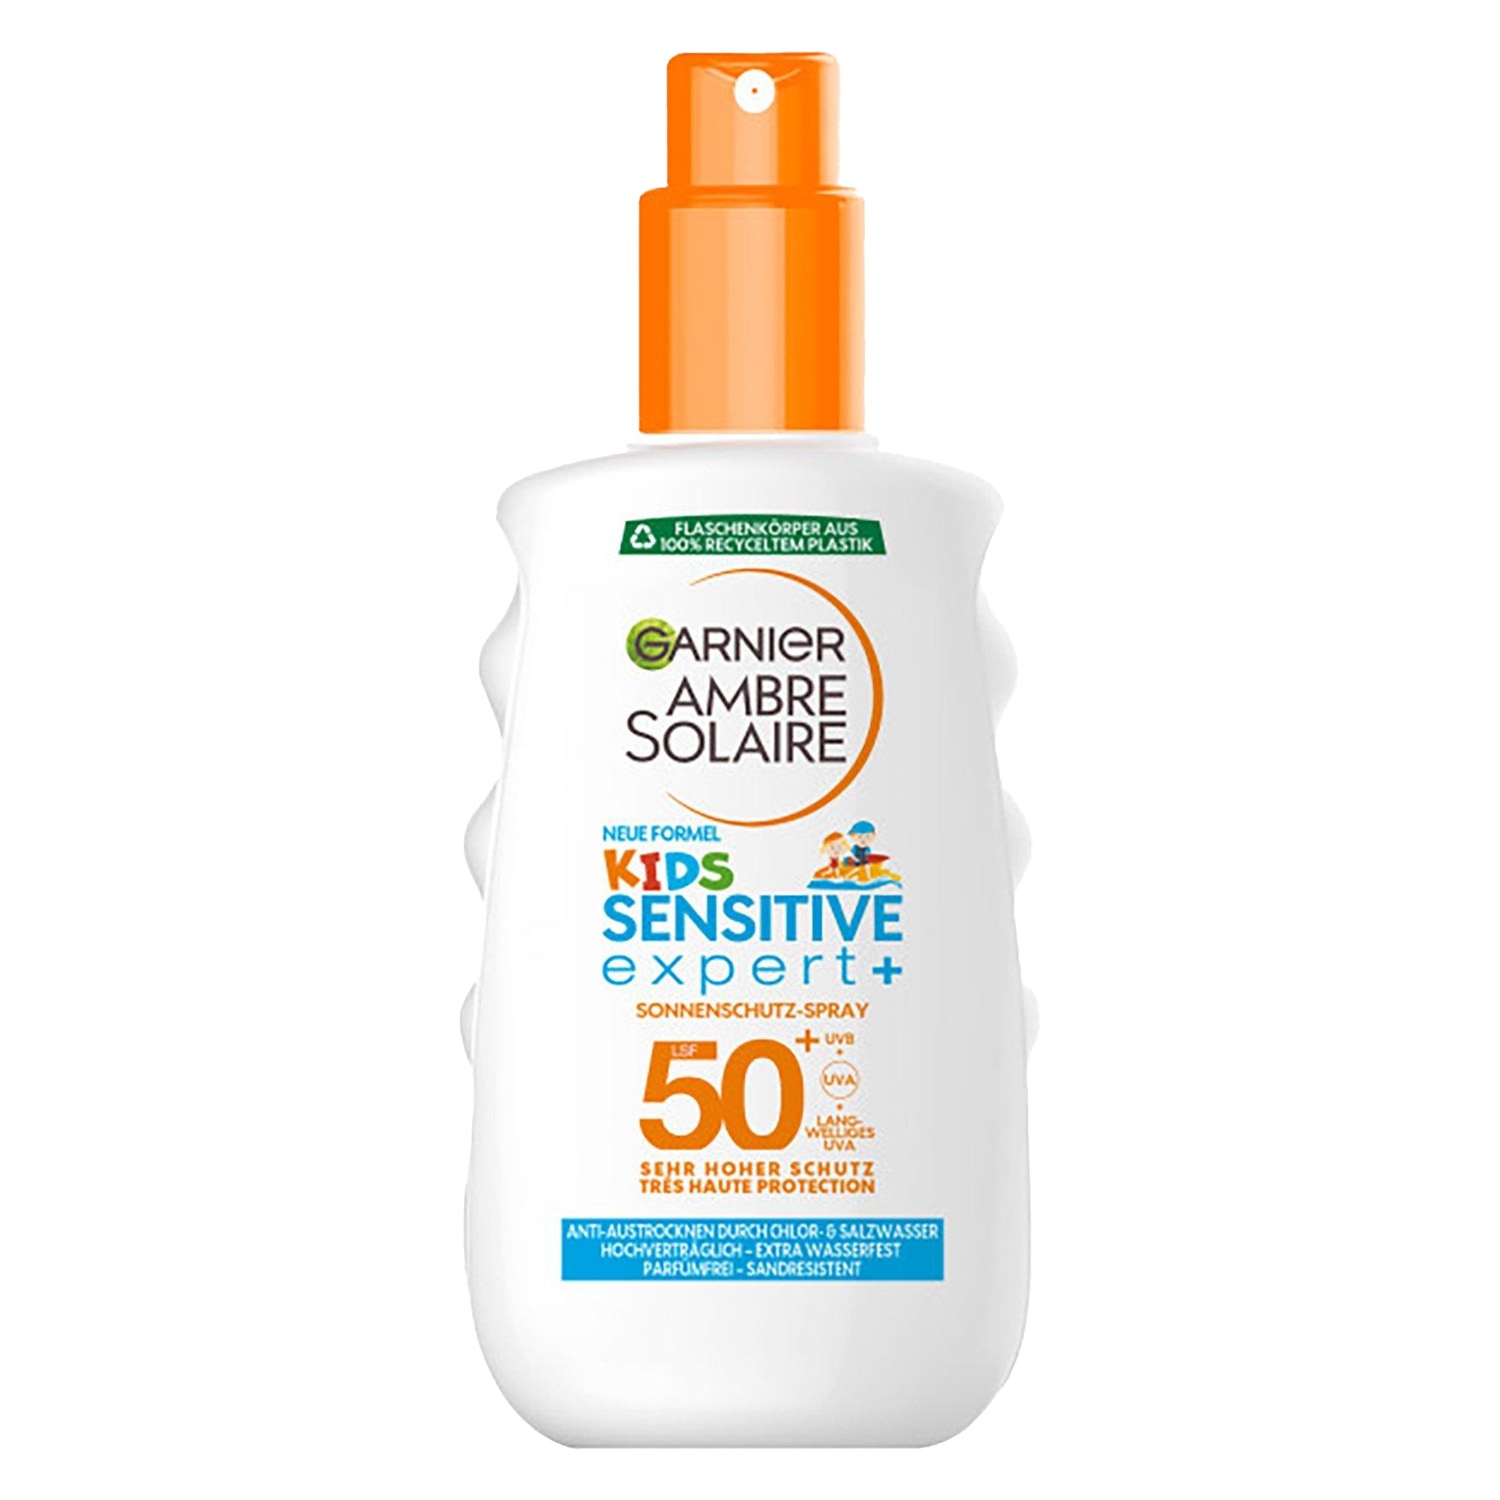 Product image from Ambre Solaire - Kids Sensitive expert+ Sonnenschutz-Spray LSF 50+